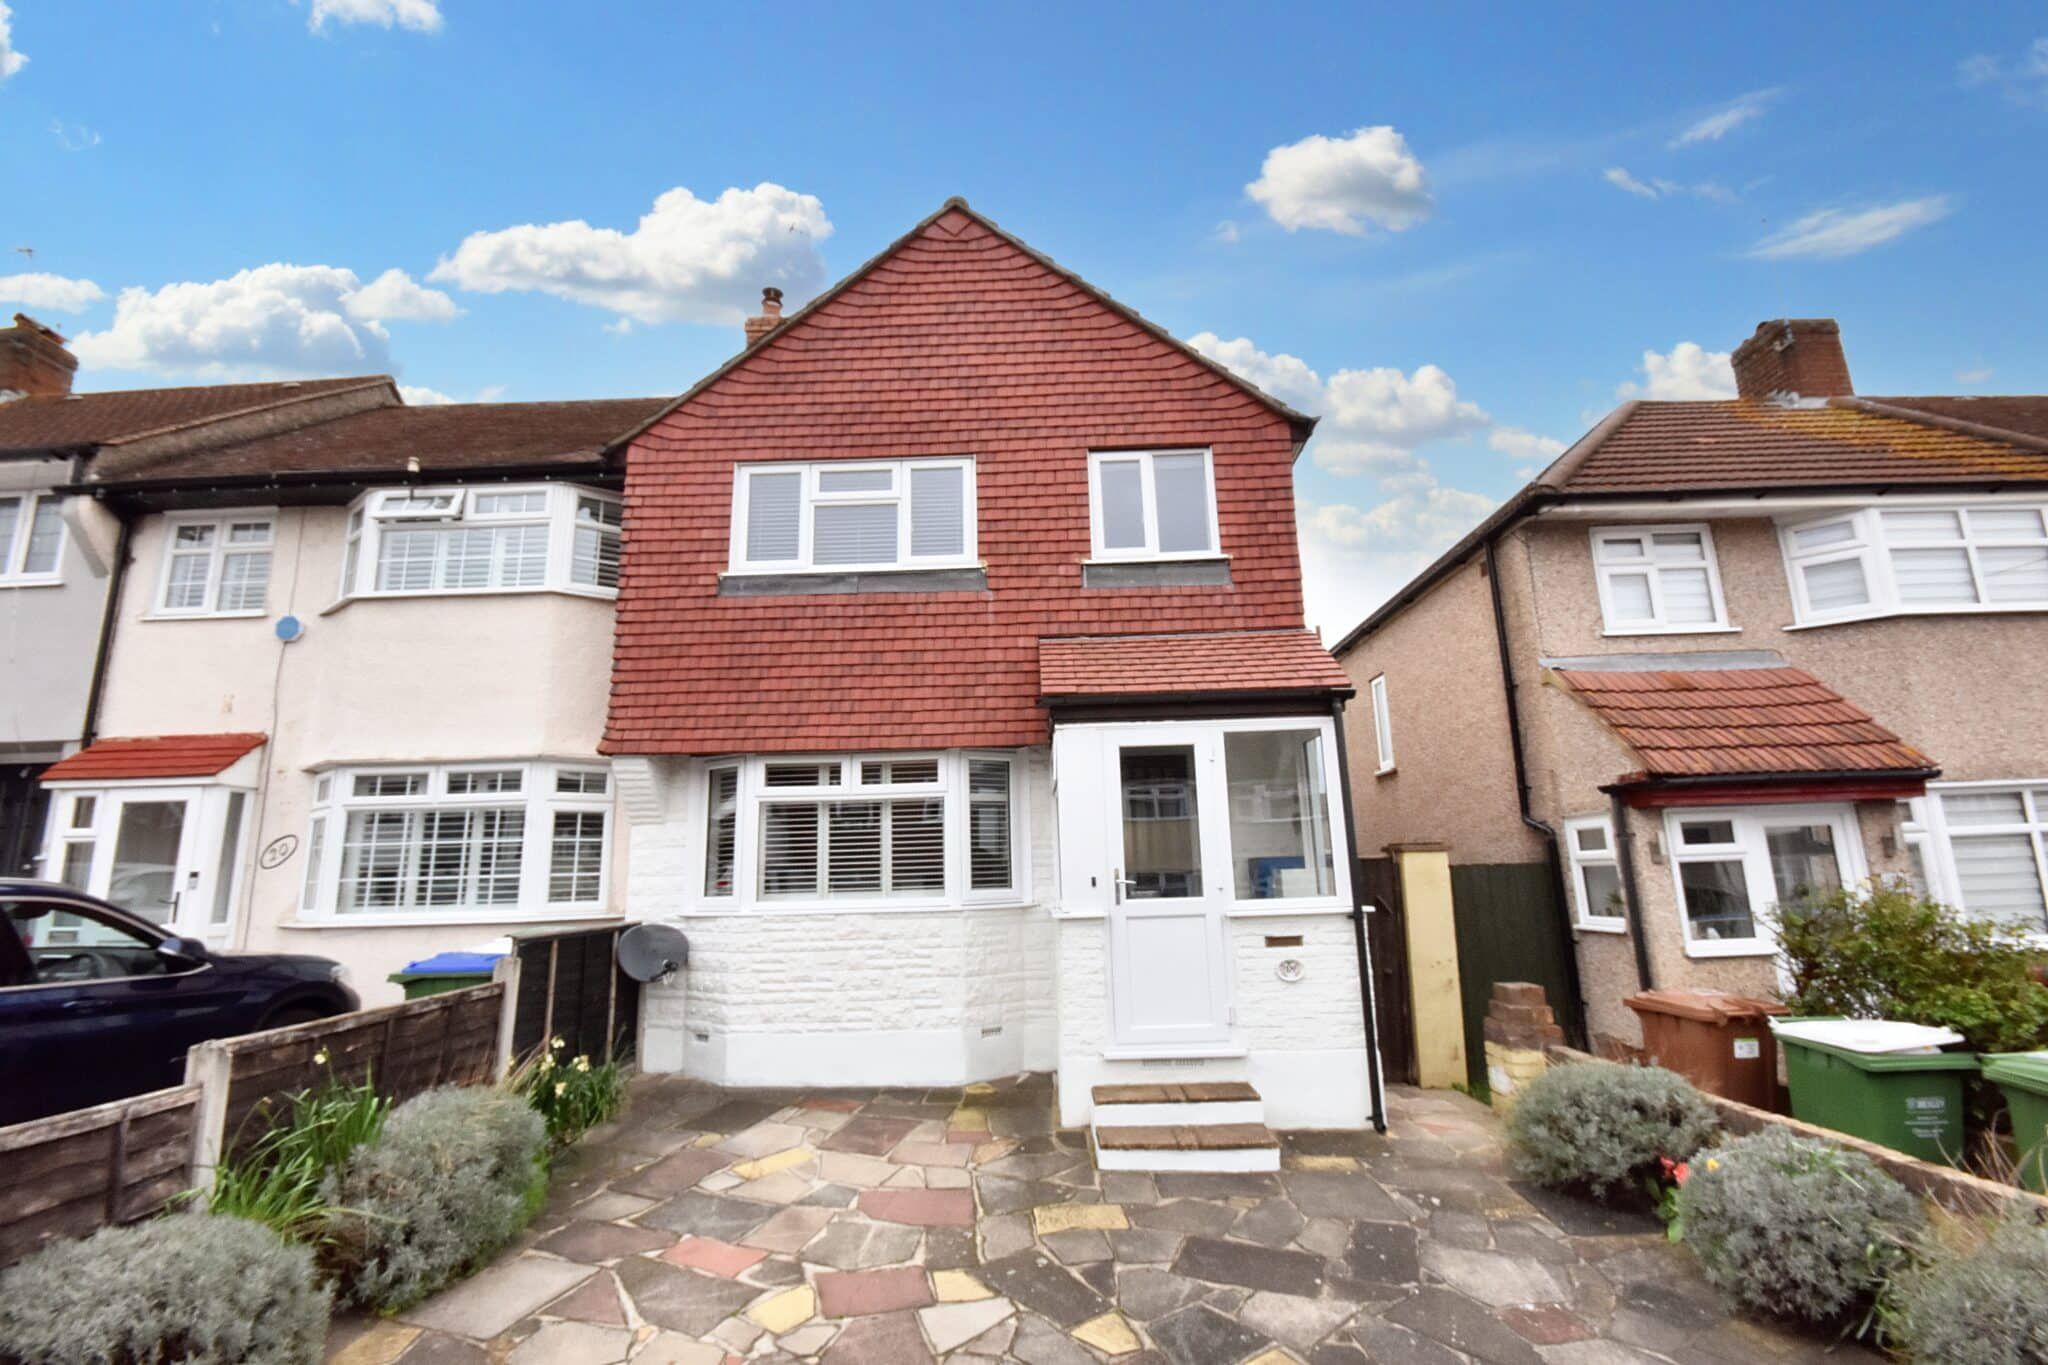 Orchard Rise West, Sidcup, Sidcup, DA15 8SZ